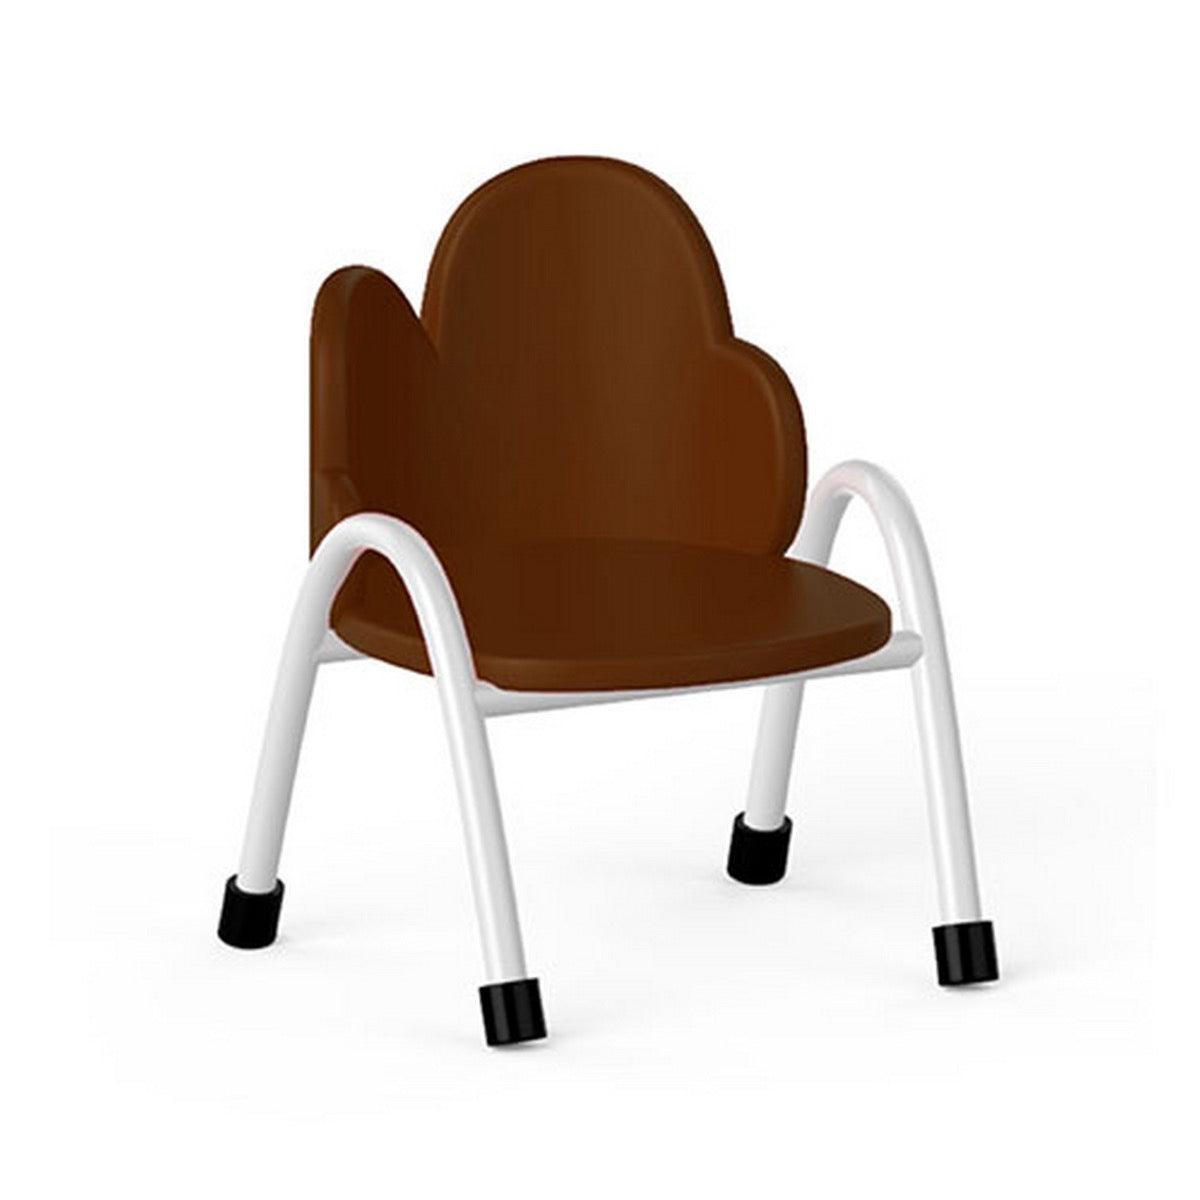 Ok Play Cloud Chair, Study Chair, Sturdy And Durable Chair, Plastic Chair, Perfect For Home, Creches And School, Brown, 5 to 10 Years, Height 12 Inches